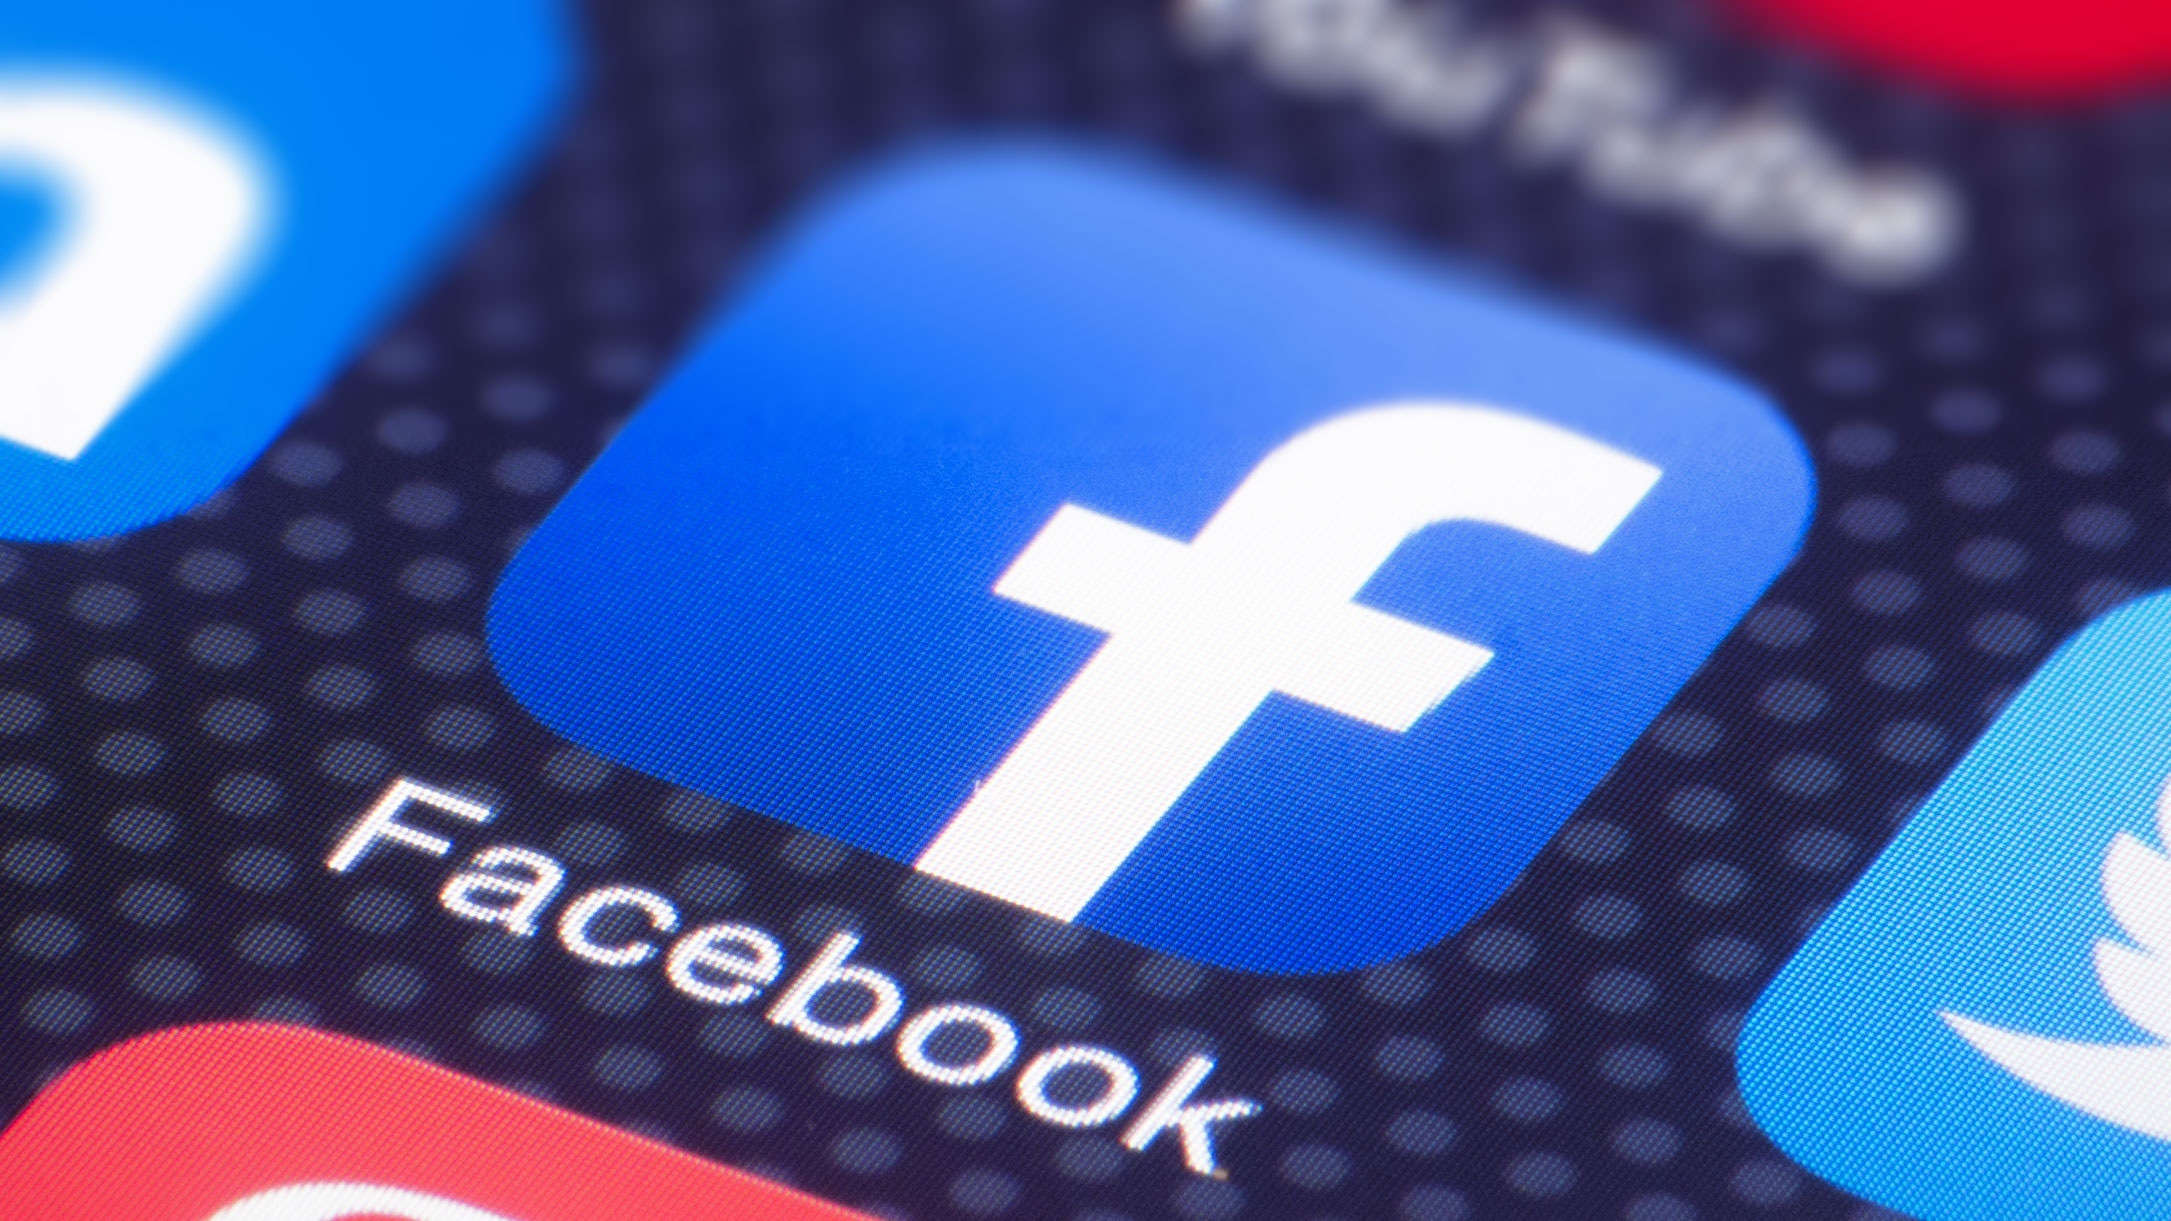 Facebook says it mistakenly asked users for views on grooming | TechCrunch